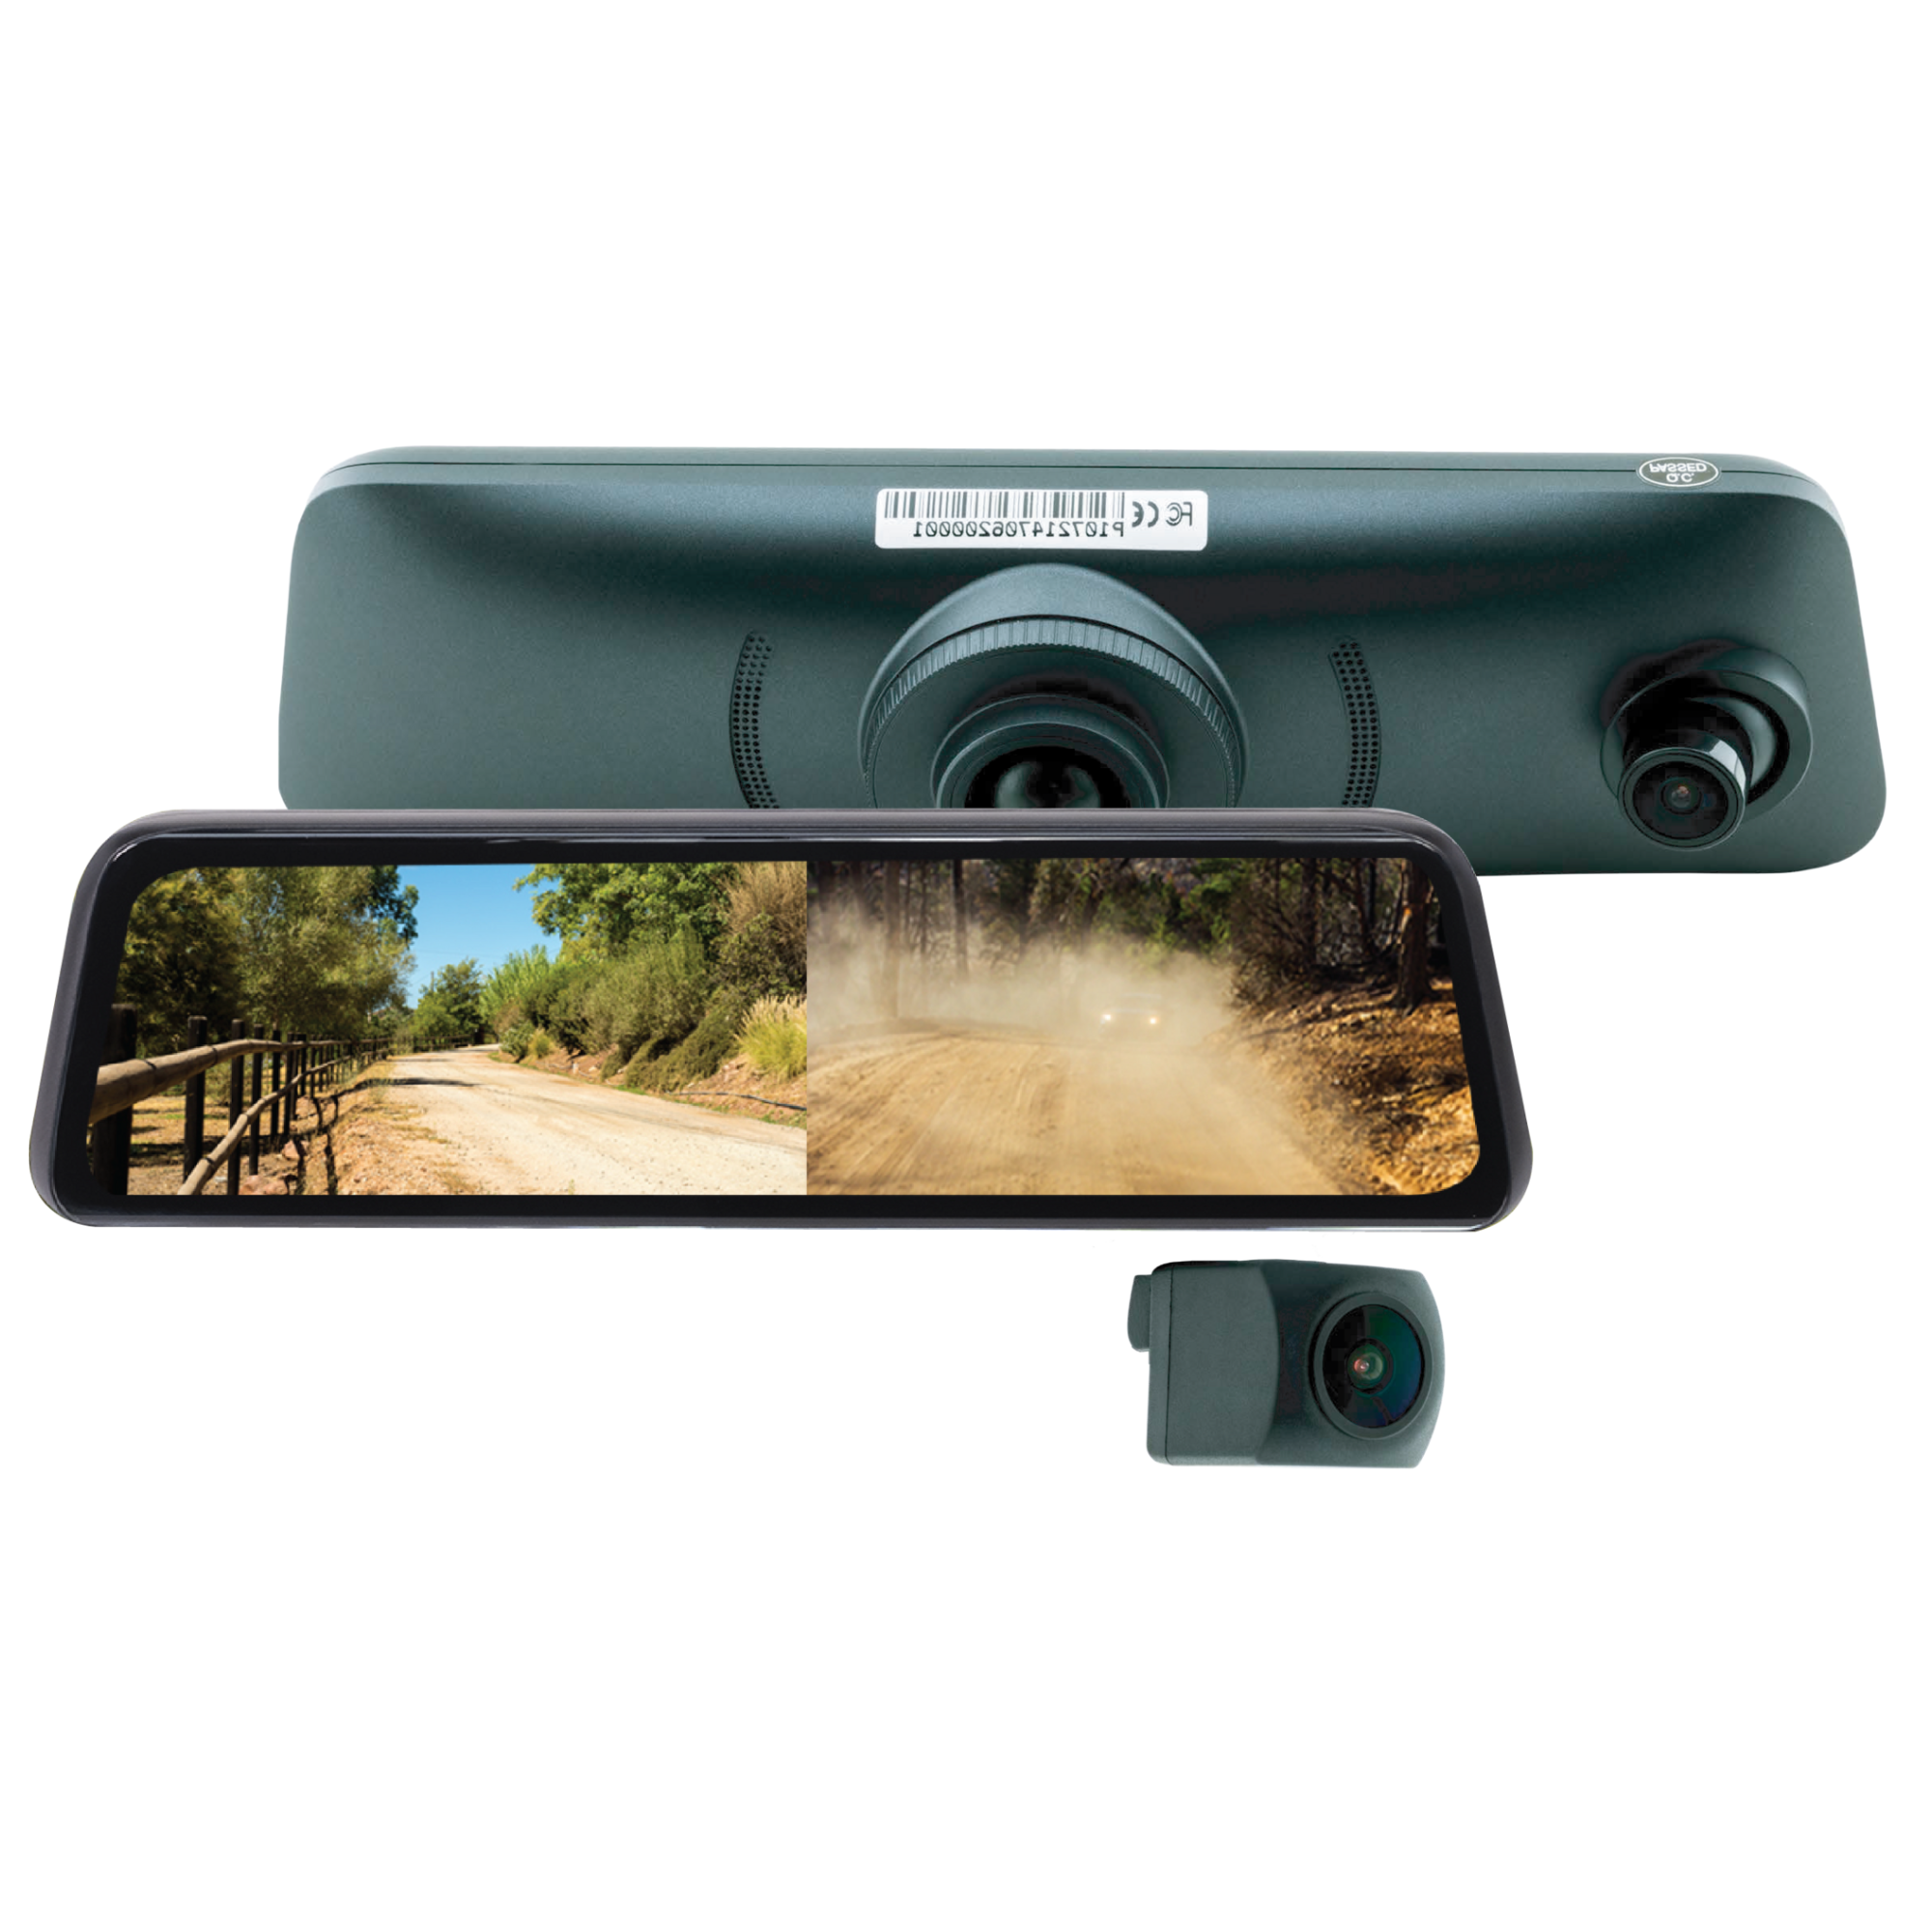 9.3" Universal Full-Screen Replacement Rear-View Mirror Monitor with DVR & Backup Camera Kit